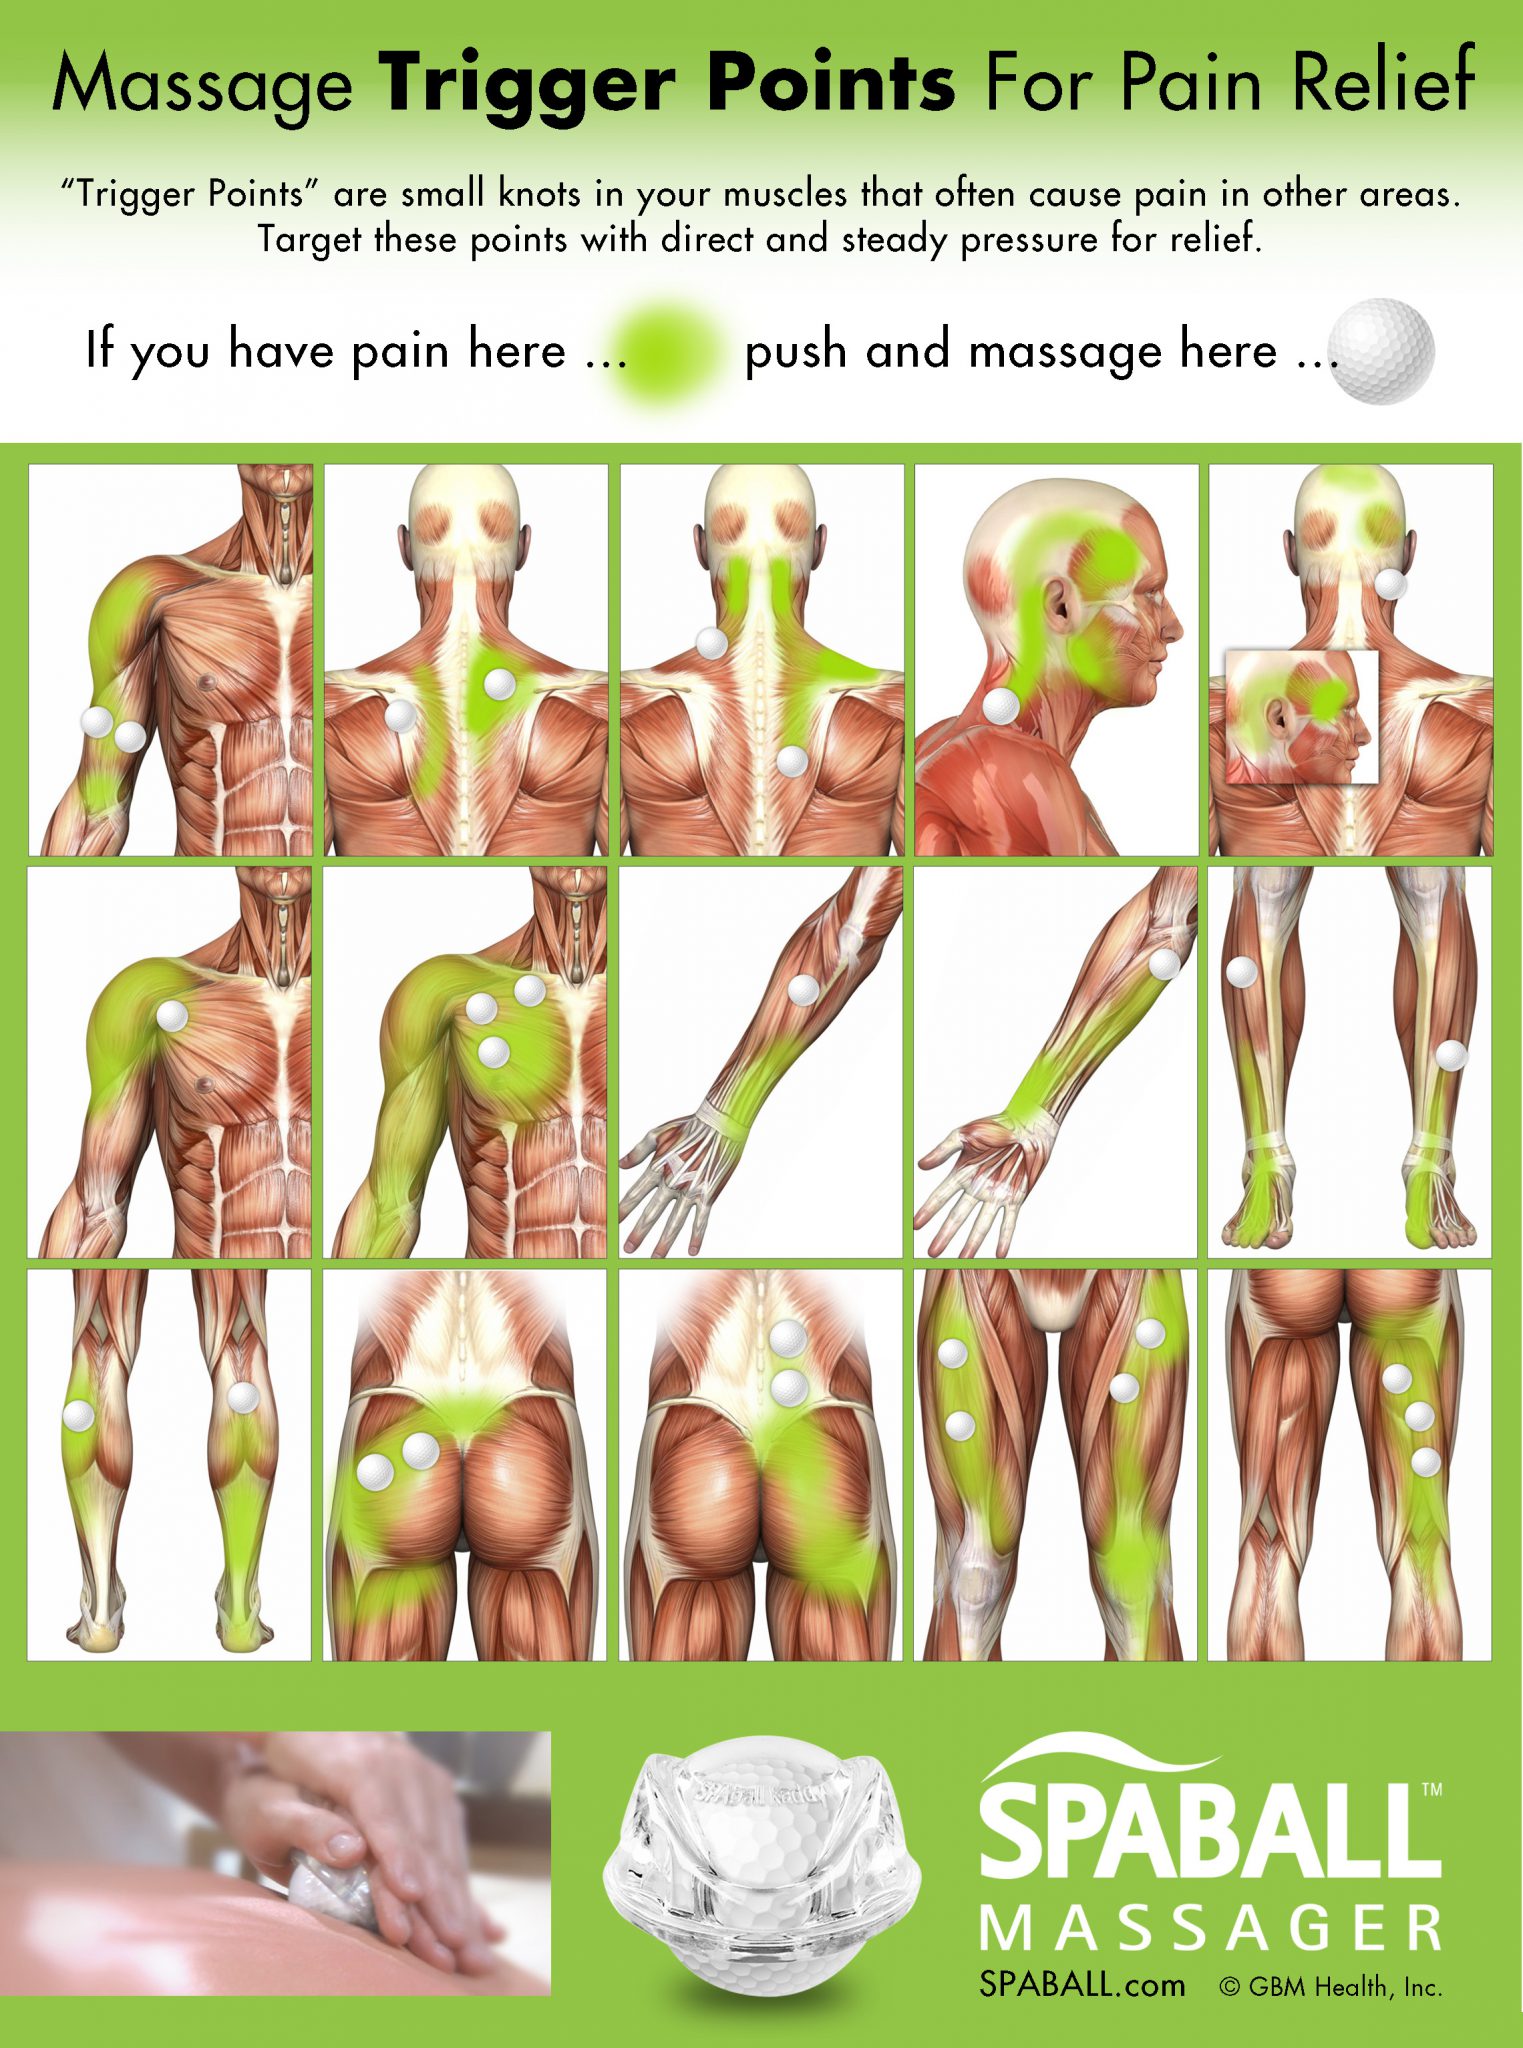 Massage Trigger Points For Pain Relief